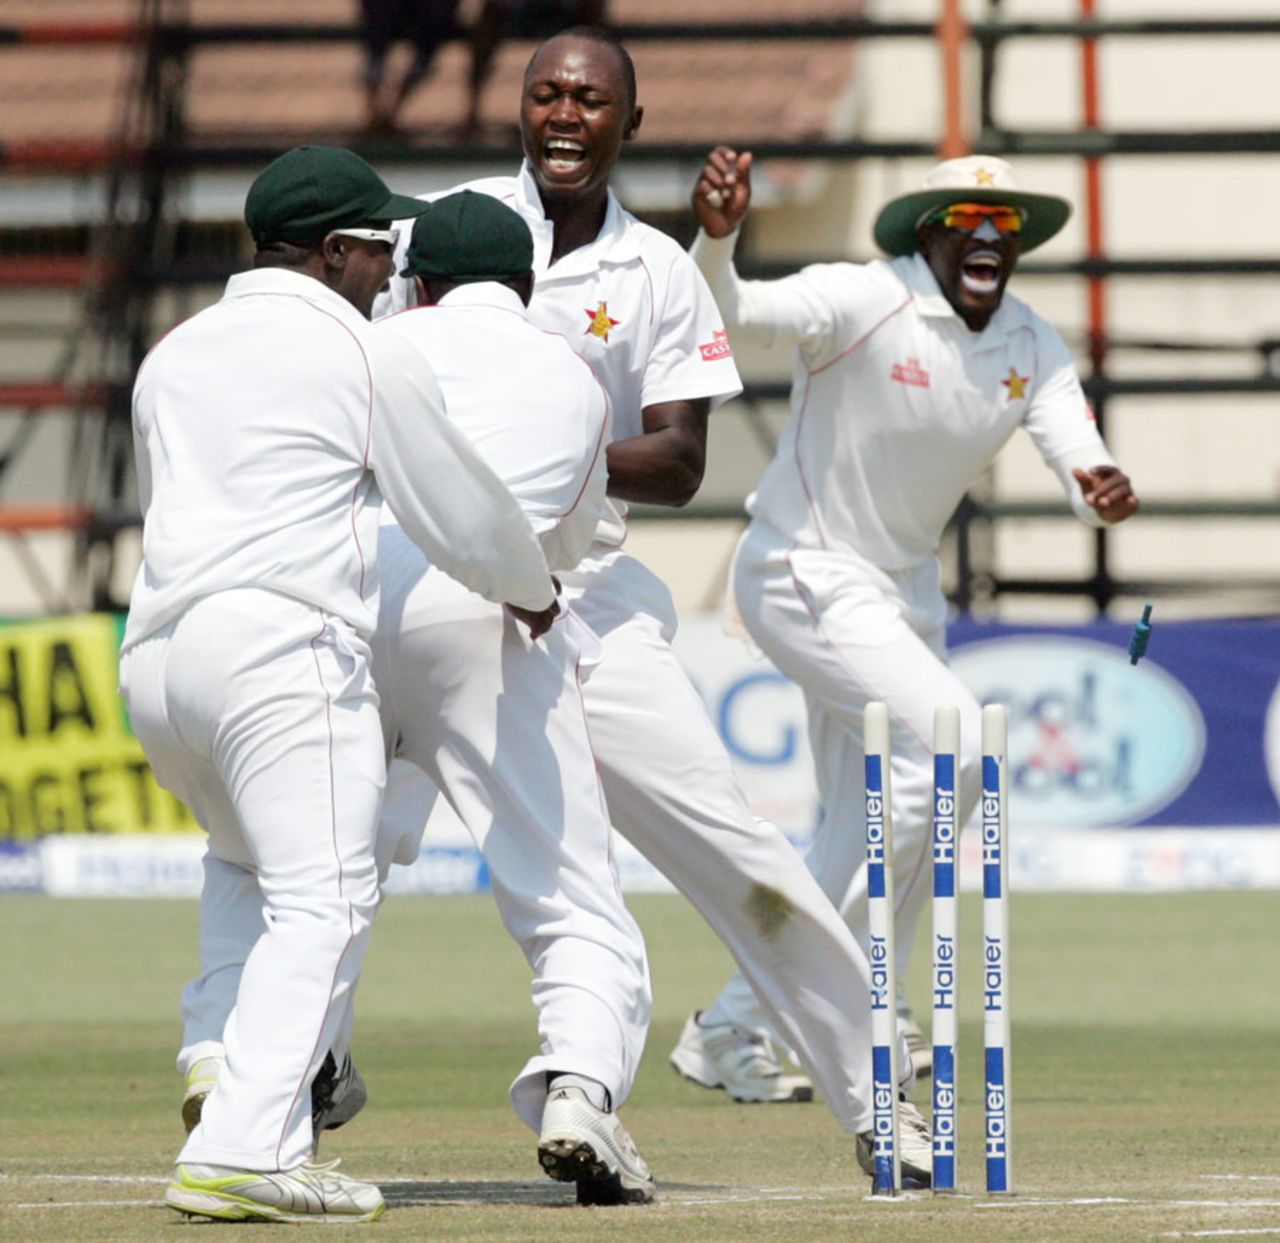 The Zimbabwe players erupt in celebration after defeating Pakistan, Zimbabwe v Pakistan, 2nd Test, Harare, 5th day, September 14, 2013